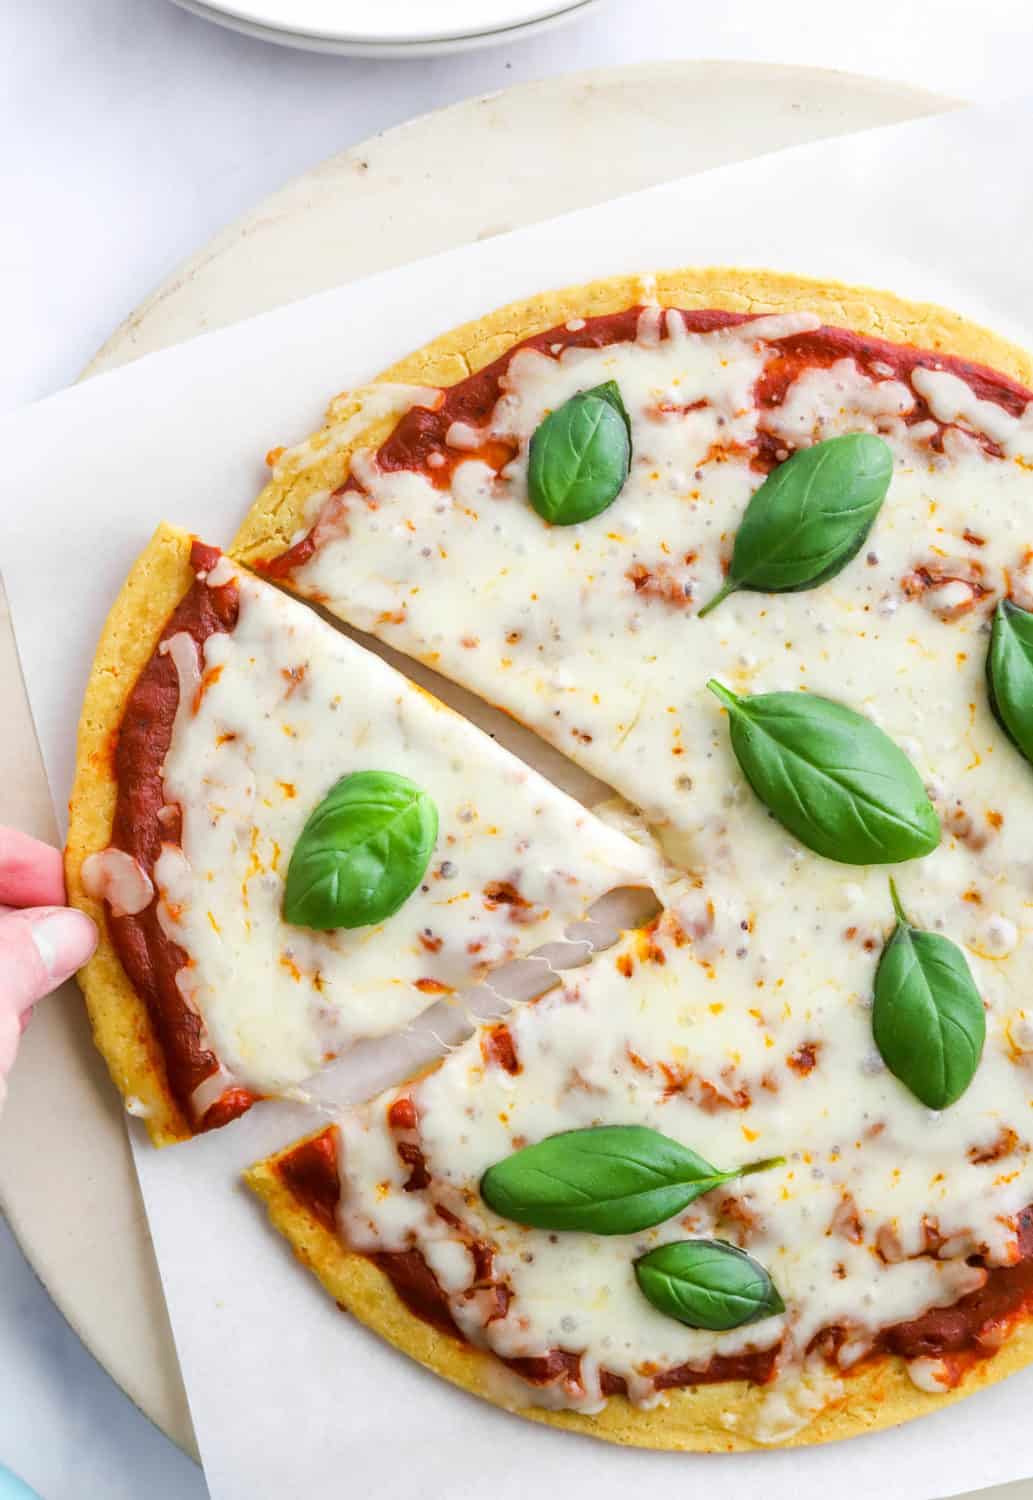 Hand pulling a slice of pizza from a whole cheese pizza with basil leaves on top of the pizza as garnish.